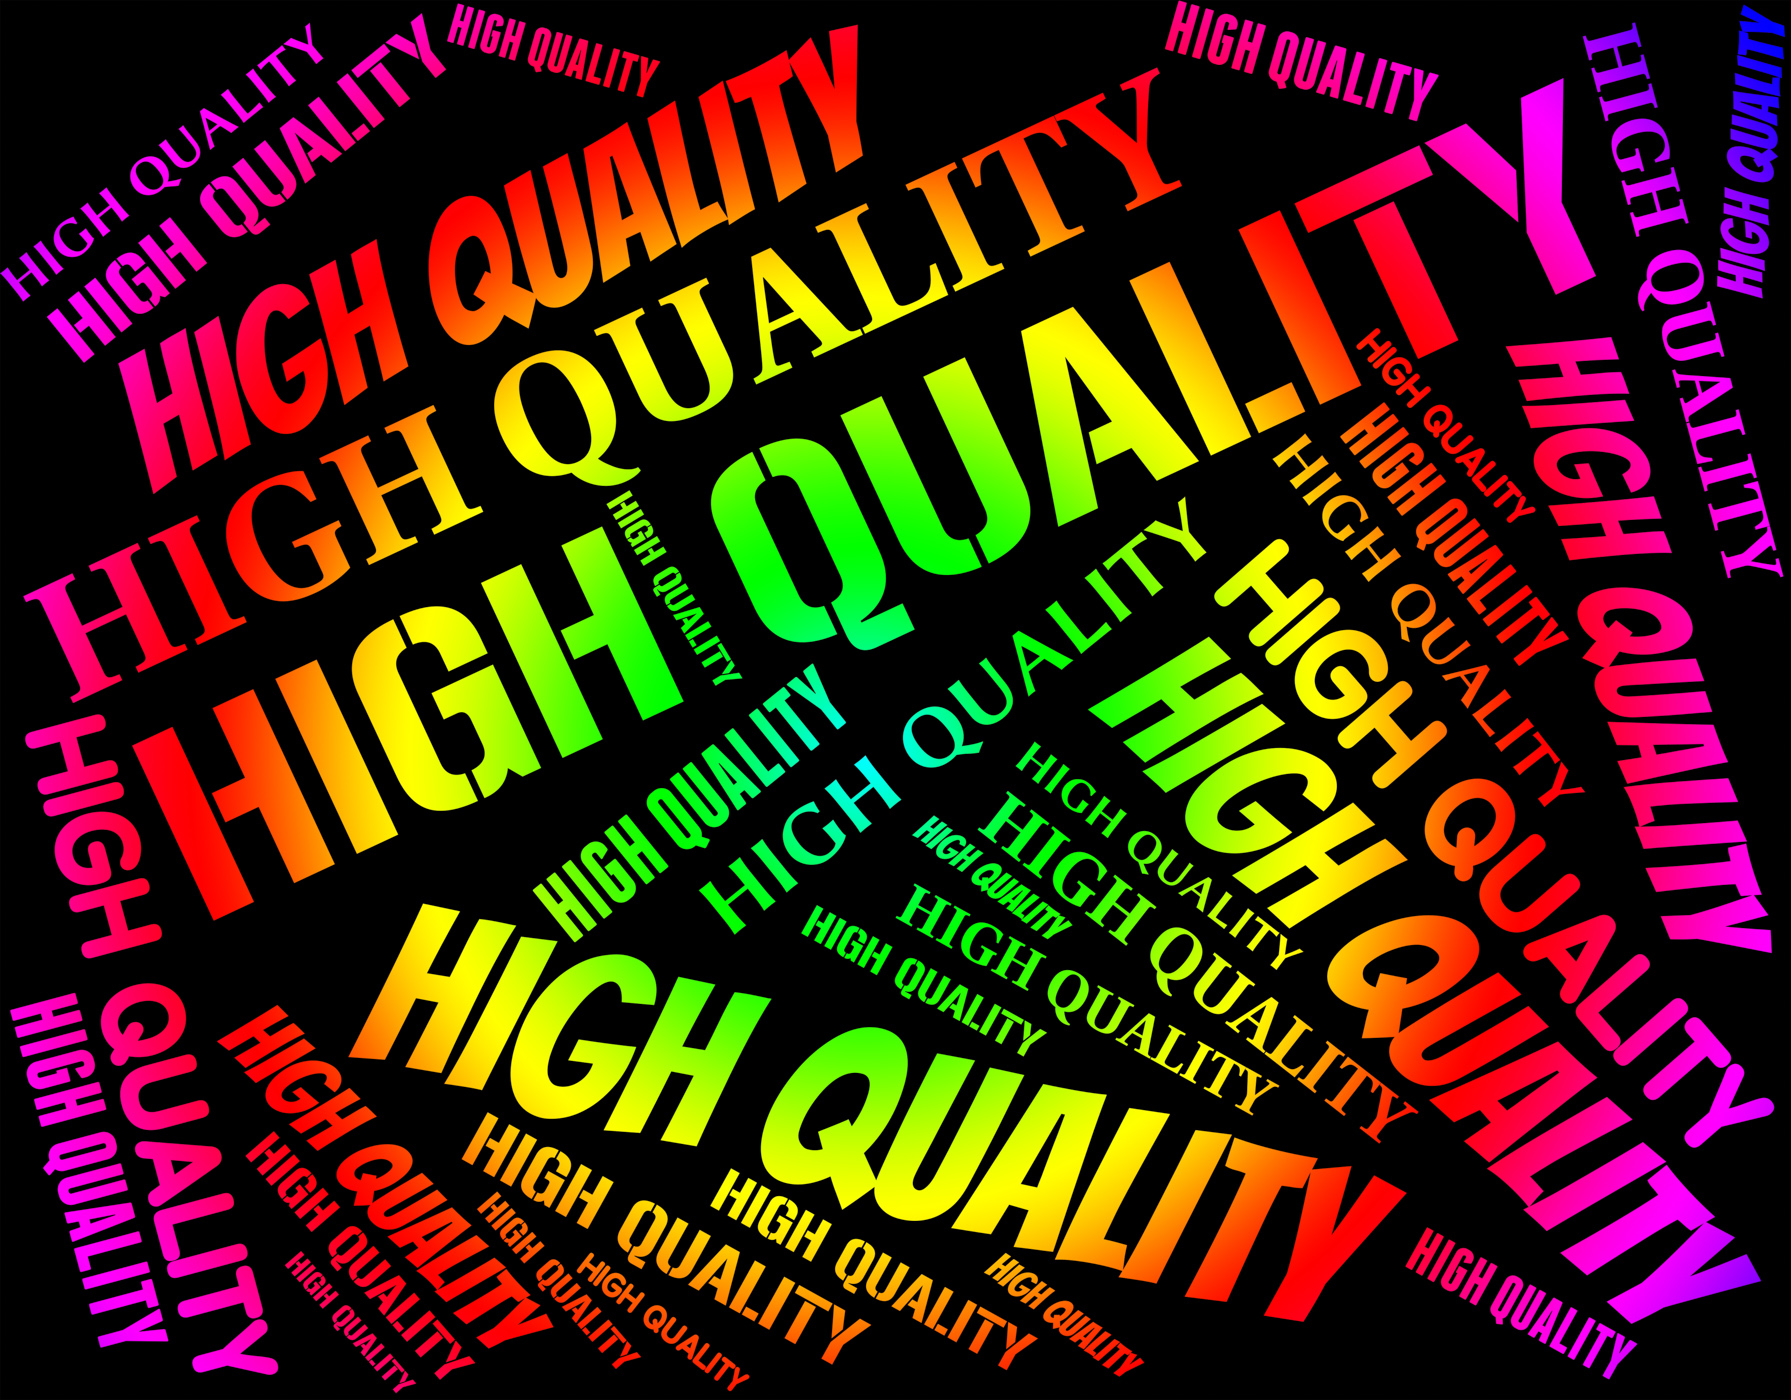 High Quality Means Number One And Approval, Supreme, Prime, Qualityassurance, Qualitycontrol, HQ Photo